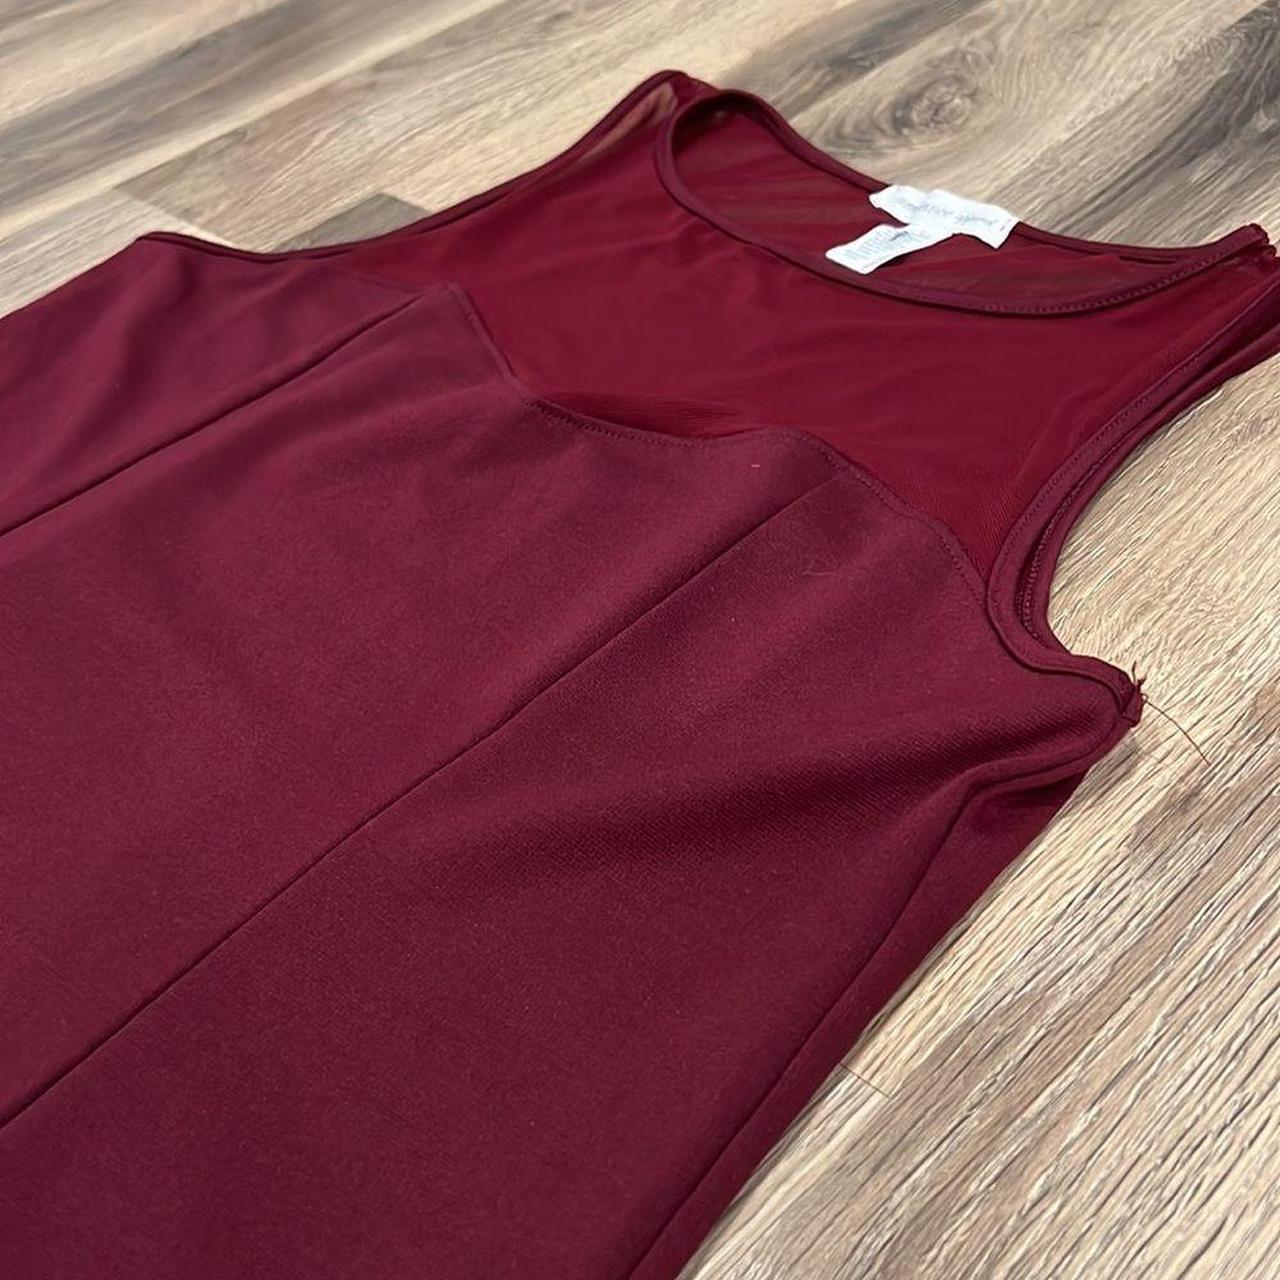 Ambiance Apparel Red Tank top  Ambiance apparel, Red tank tops, Apparel